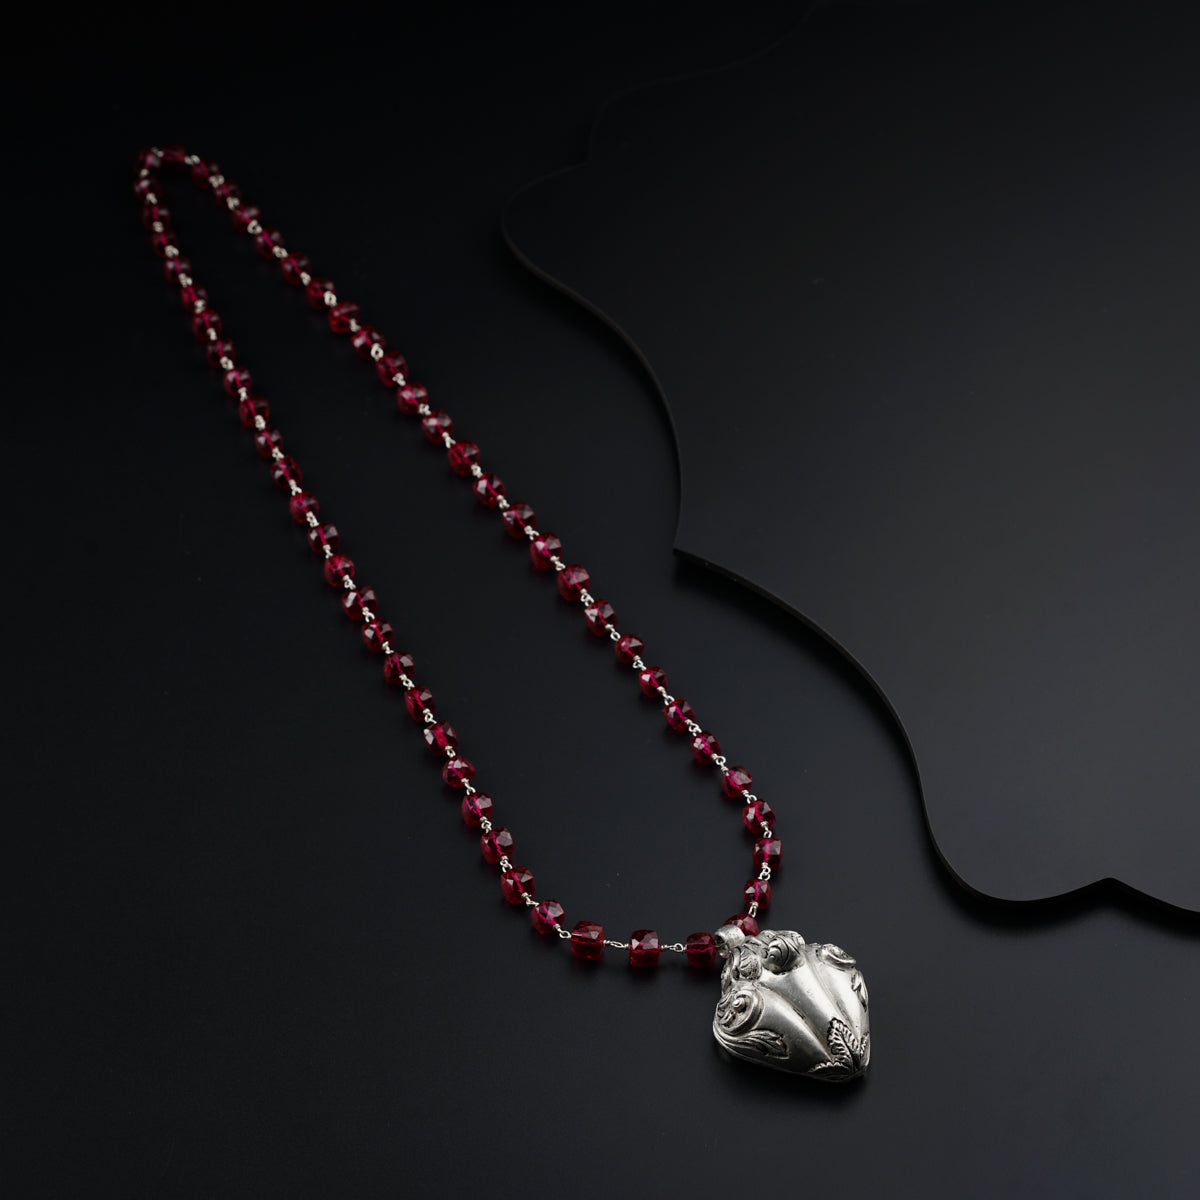 a red beaded necklace on a black surface